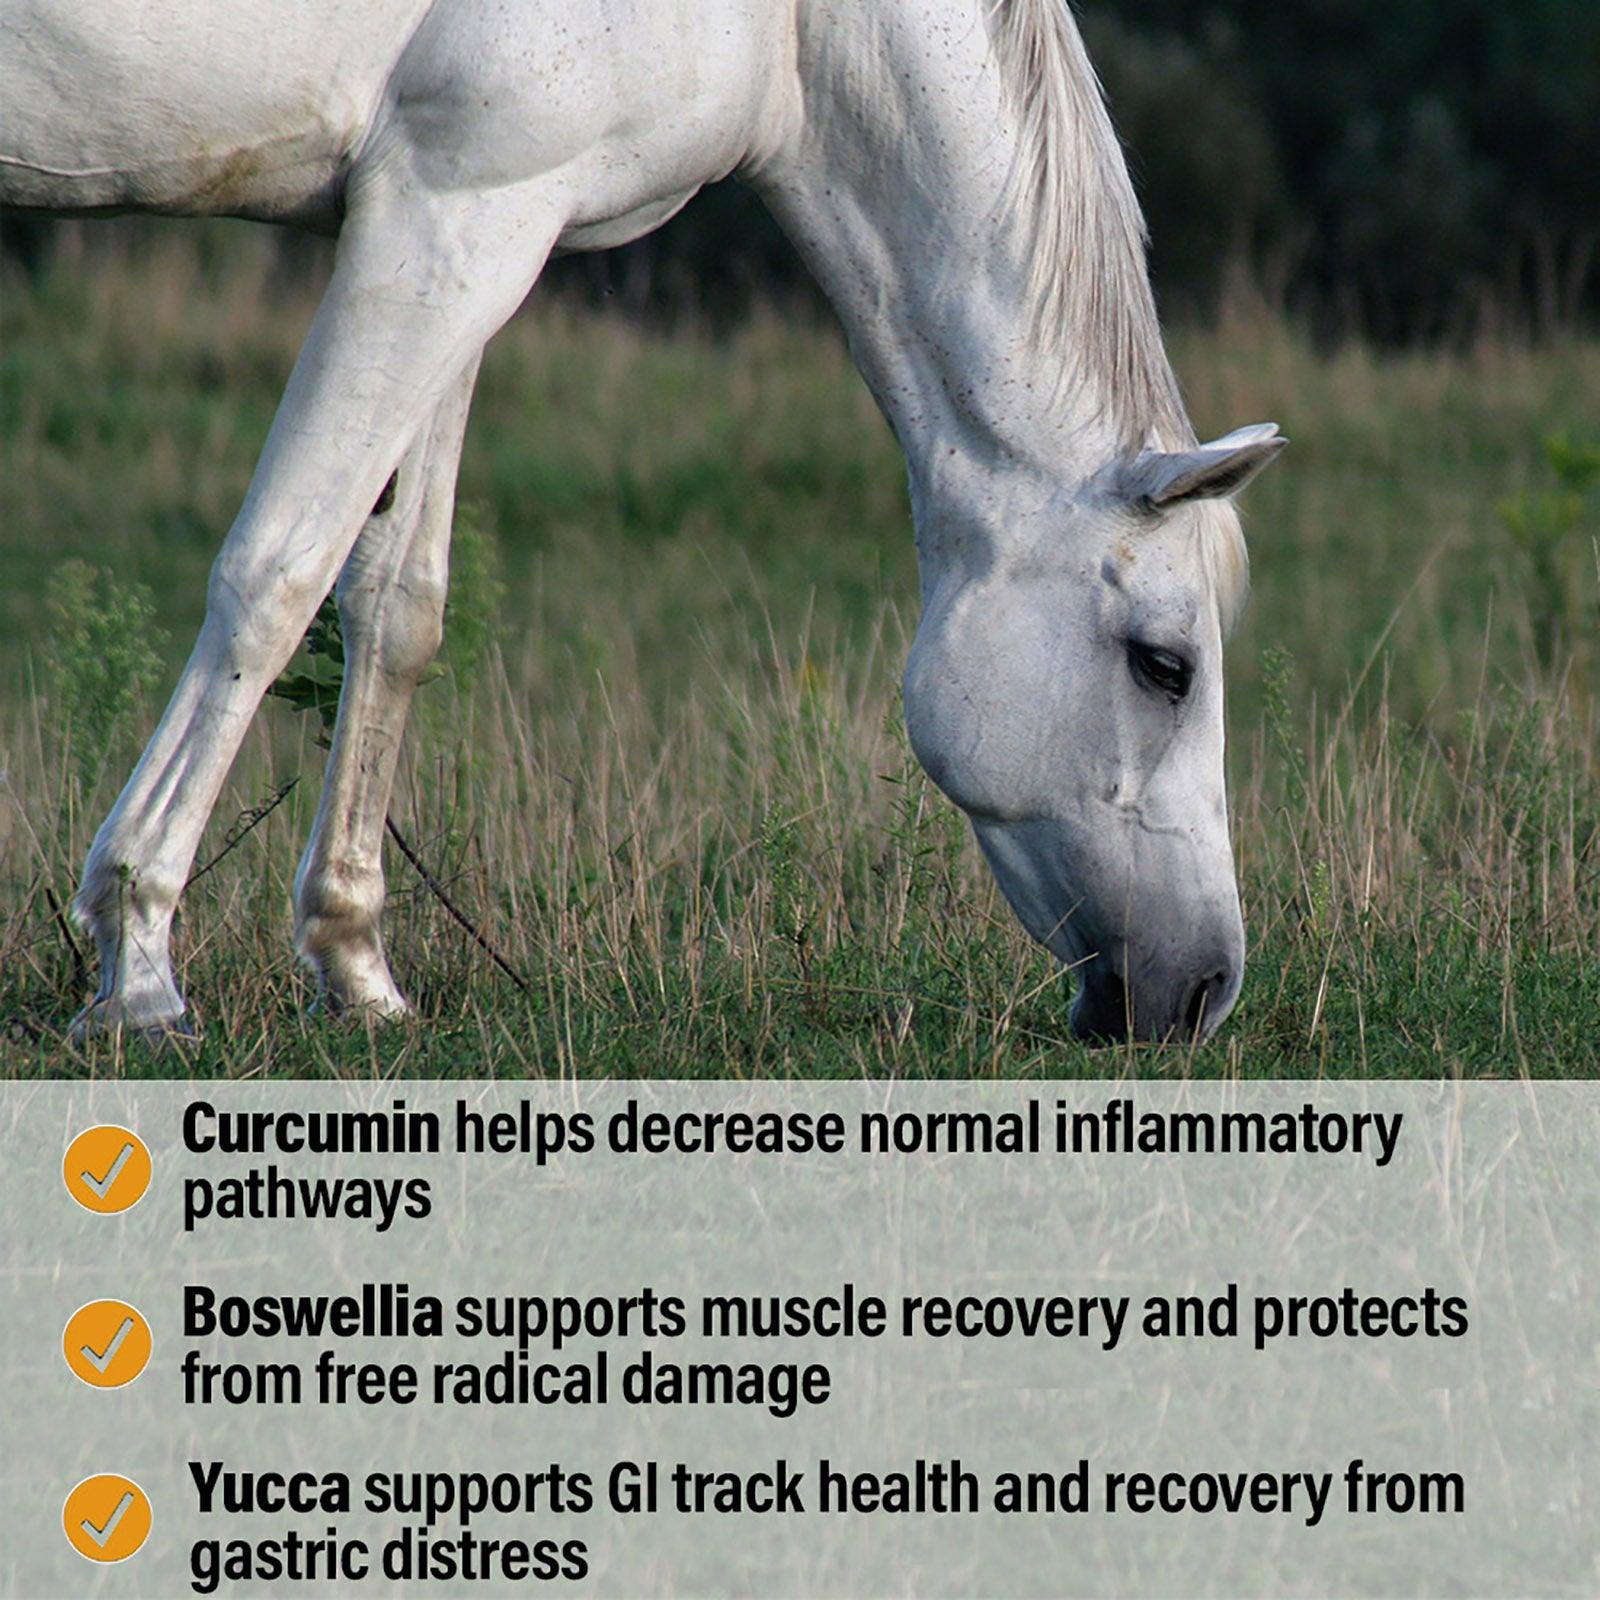 White horse grazing in the field with a caption Curcumin helps decrease normal inflammatory pathways.  Boswellia supports muscle recovery and protects from free radical damage.  Yucca supports GI track health and recovery from gastric distress.